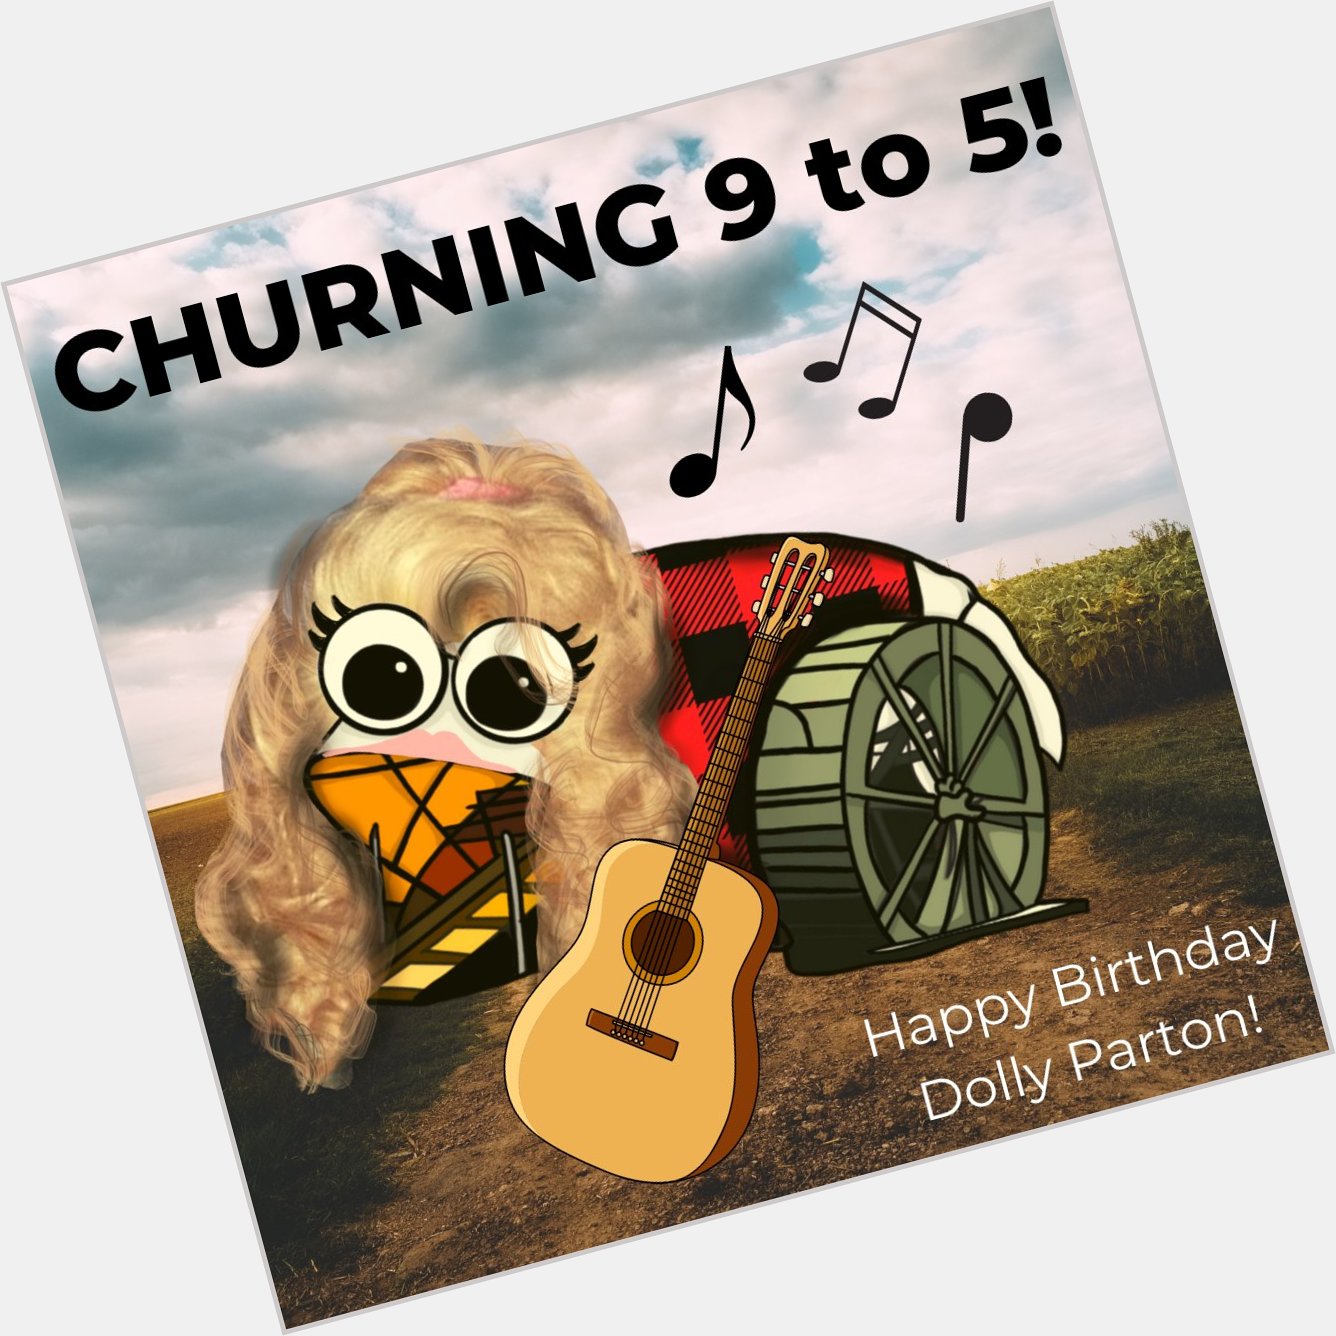 Churning 9 to 5! Happy Birthday to the QUEEN Dolly Parton! 